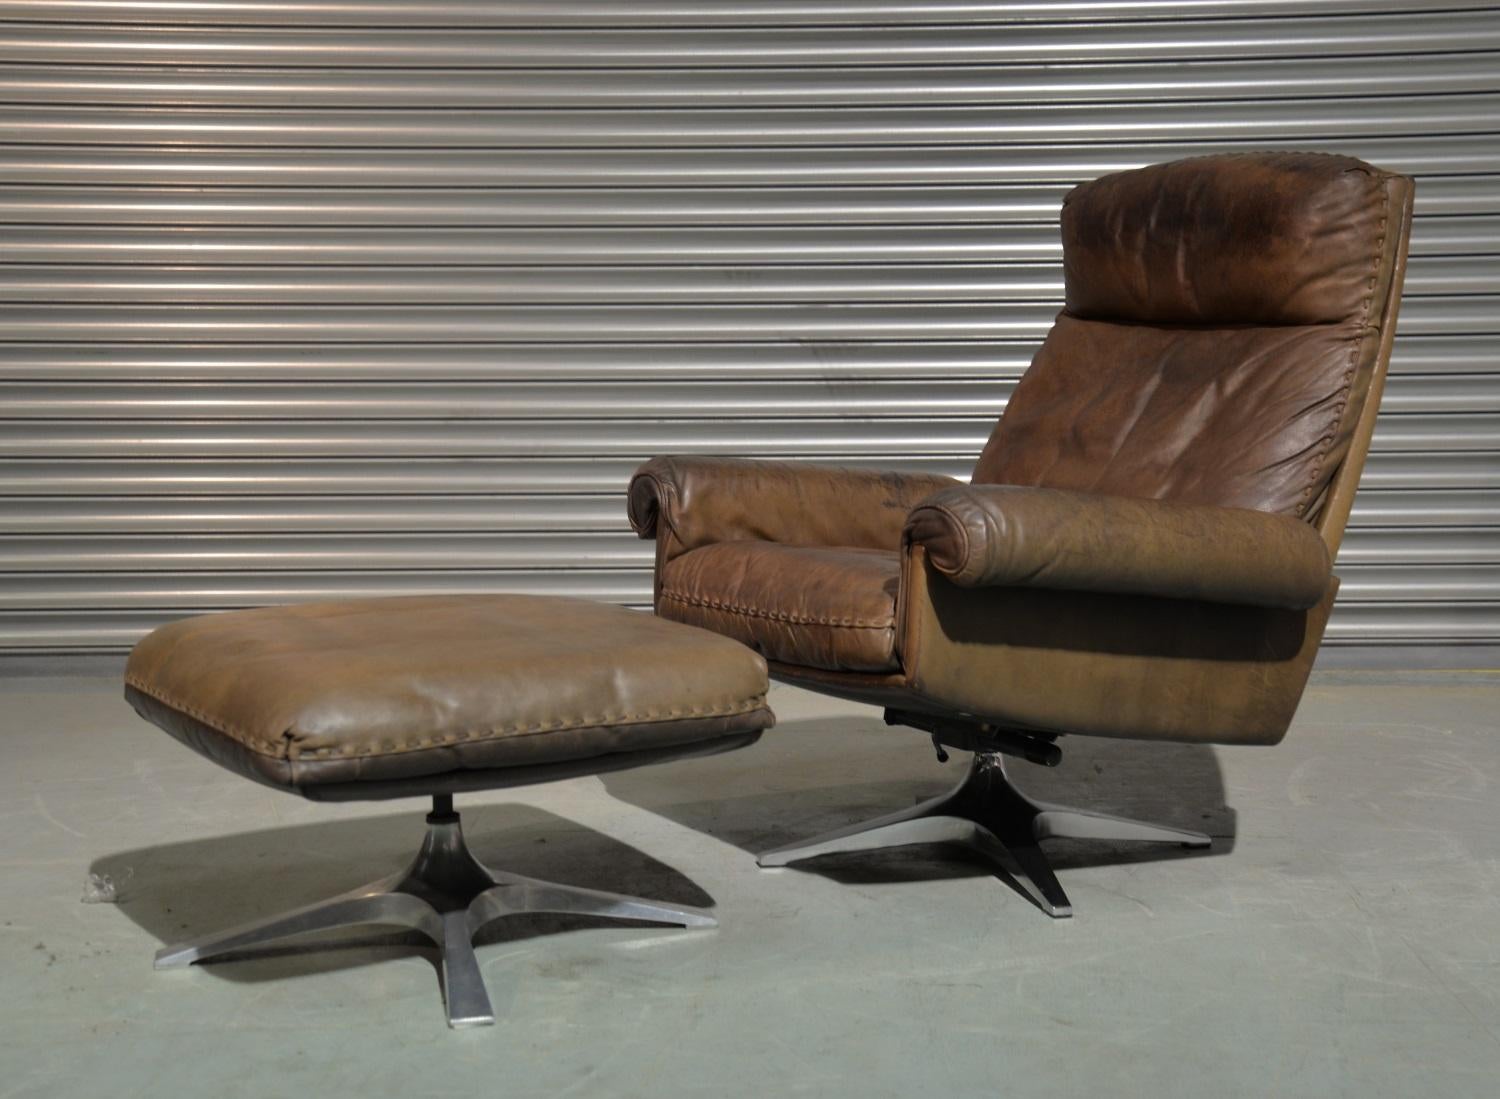 Discounted airfreight for our US and International customers ( from 2 weeks door to door) 

We are delighted to bring to you a highly desirable and rarely available vintage 1970s De Sede DS 31 high back swivel lounge armchair with ottoman. Hand